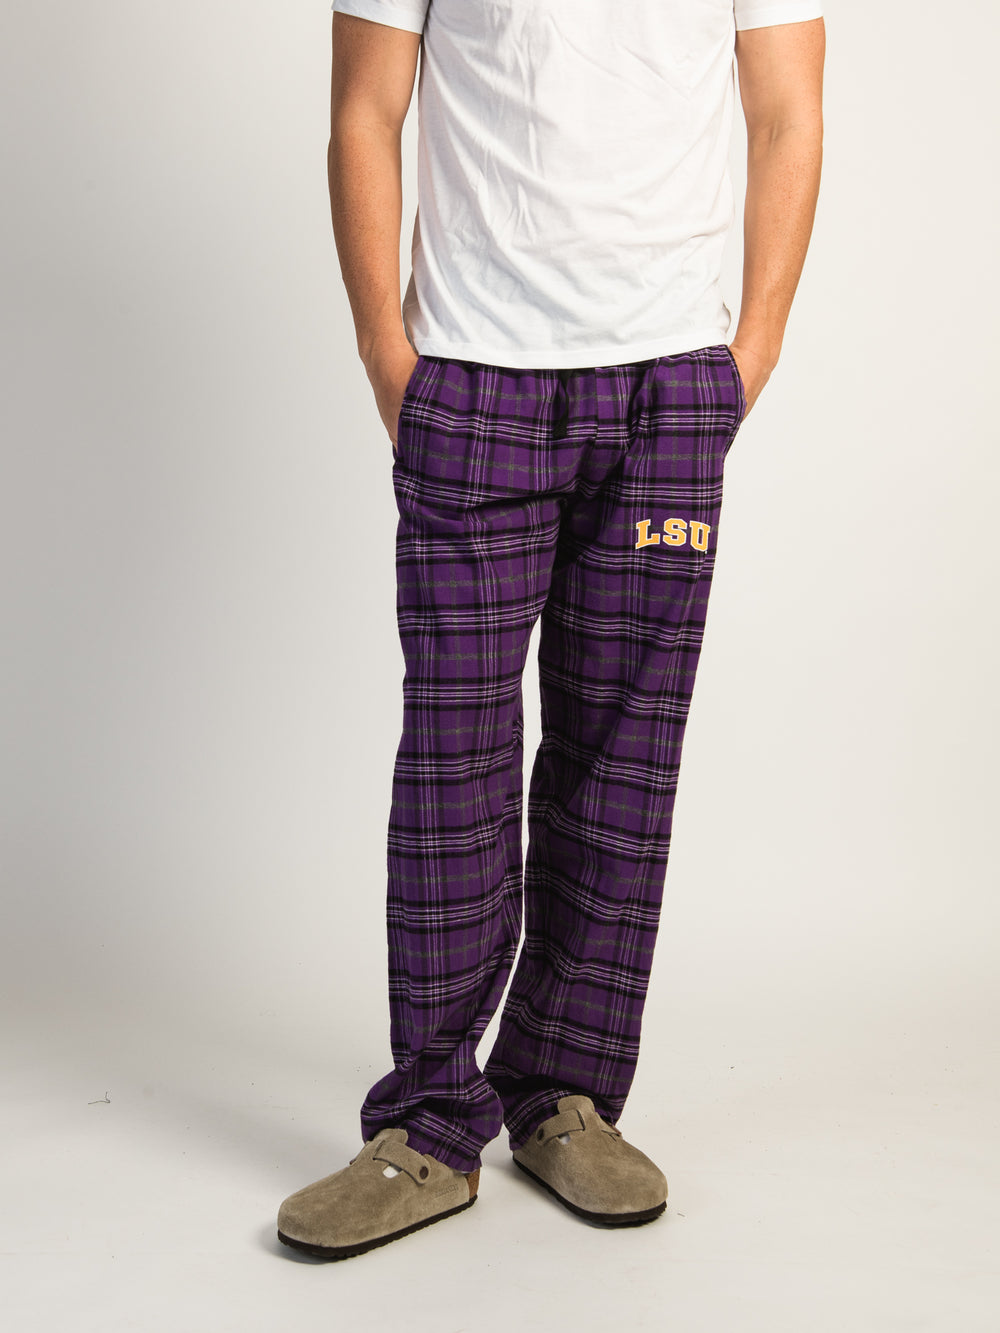 RUSSELL LSU FLANNEL PANT